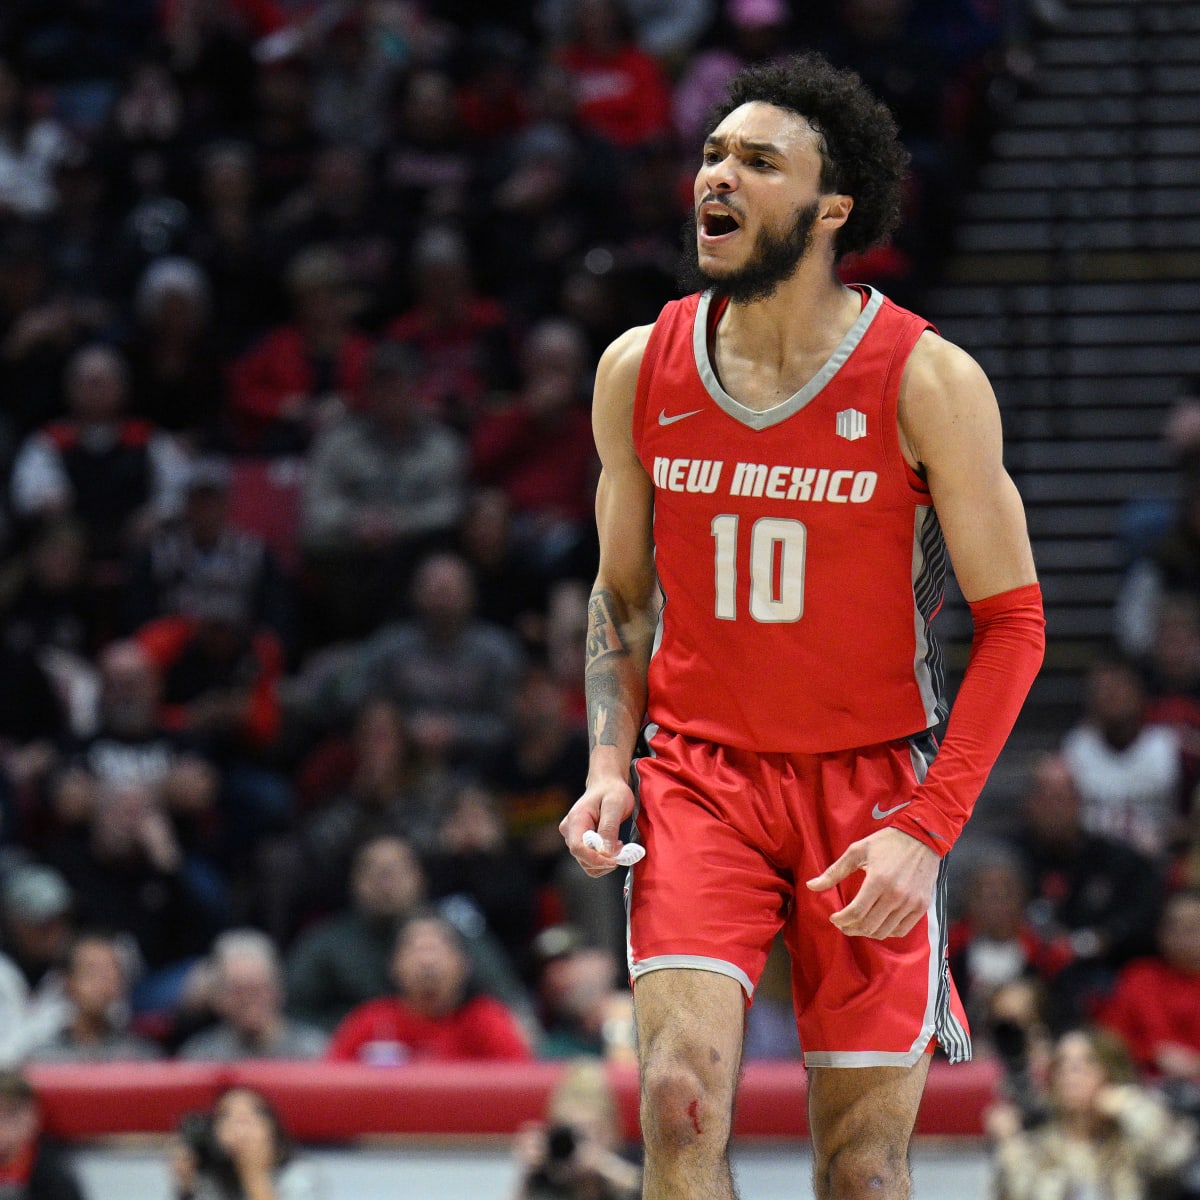 NBA Draft Scouting Report: New Mexico's Jaelen House - NBA Draft Digest - Latest Draft News and Prospect Rankings